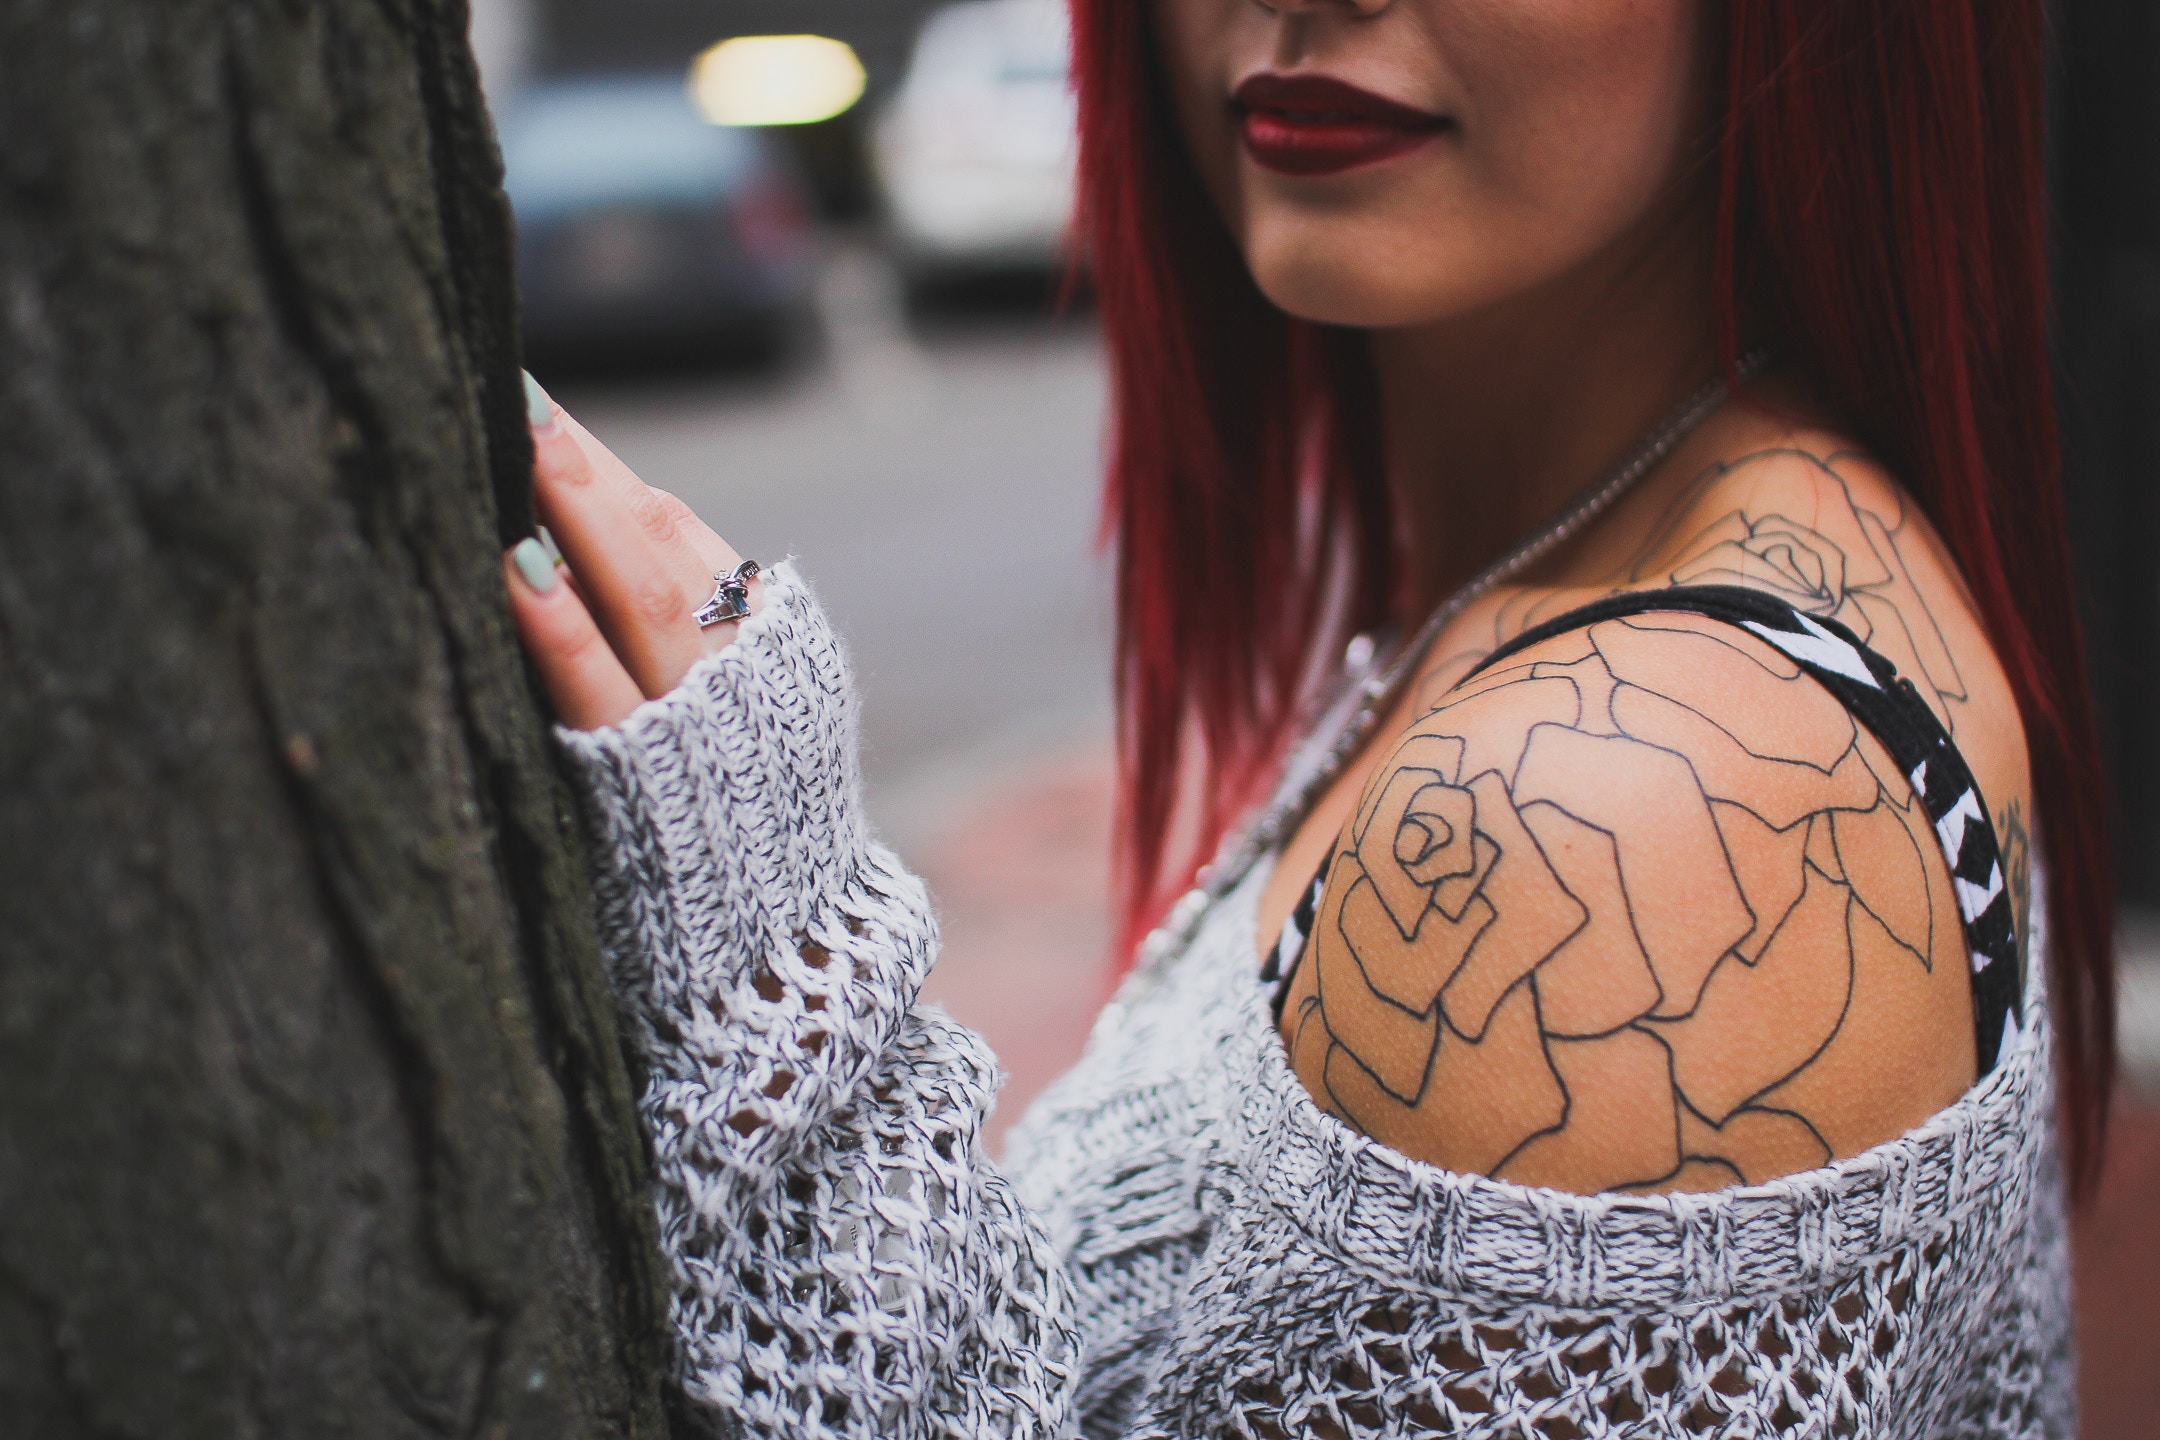 This Girls Tattoo Makes A Powerful Point About Depression